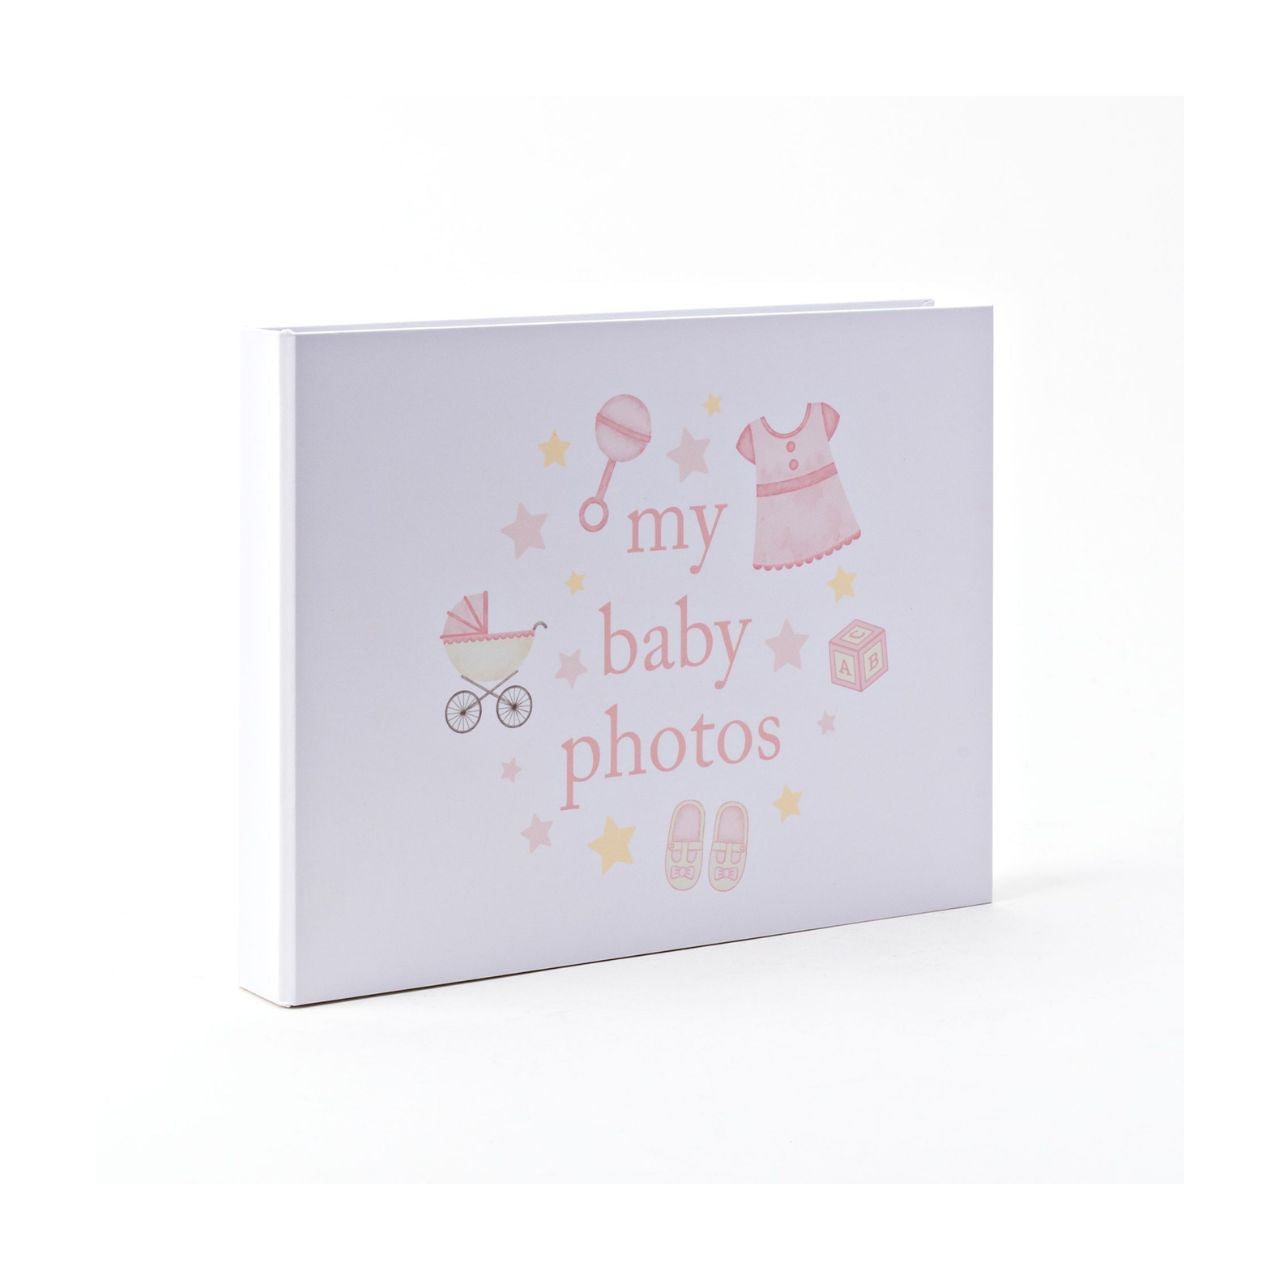 Keep an adorable record of those early days, weeks and months with this baby photo album. From the Hello Baby collection by CELEBRATIONS - gifts to celebrate a perfect new arrival.